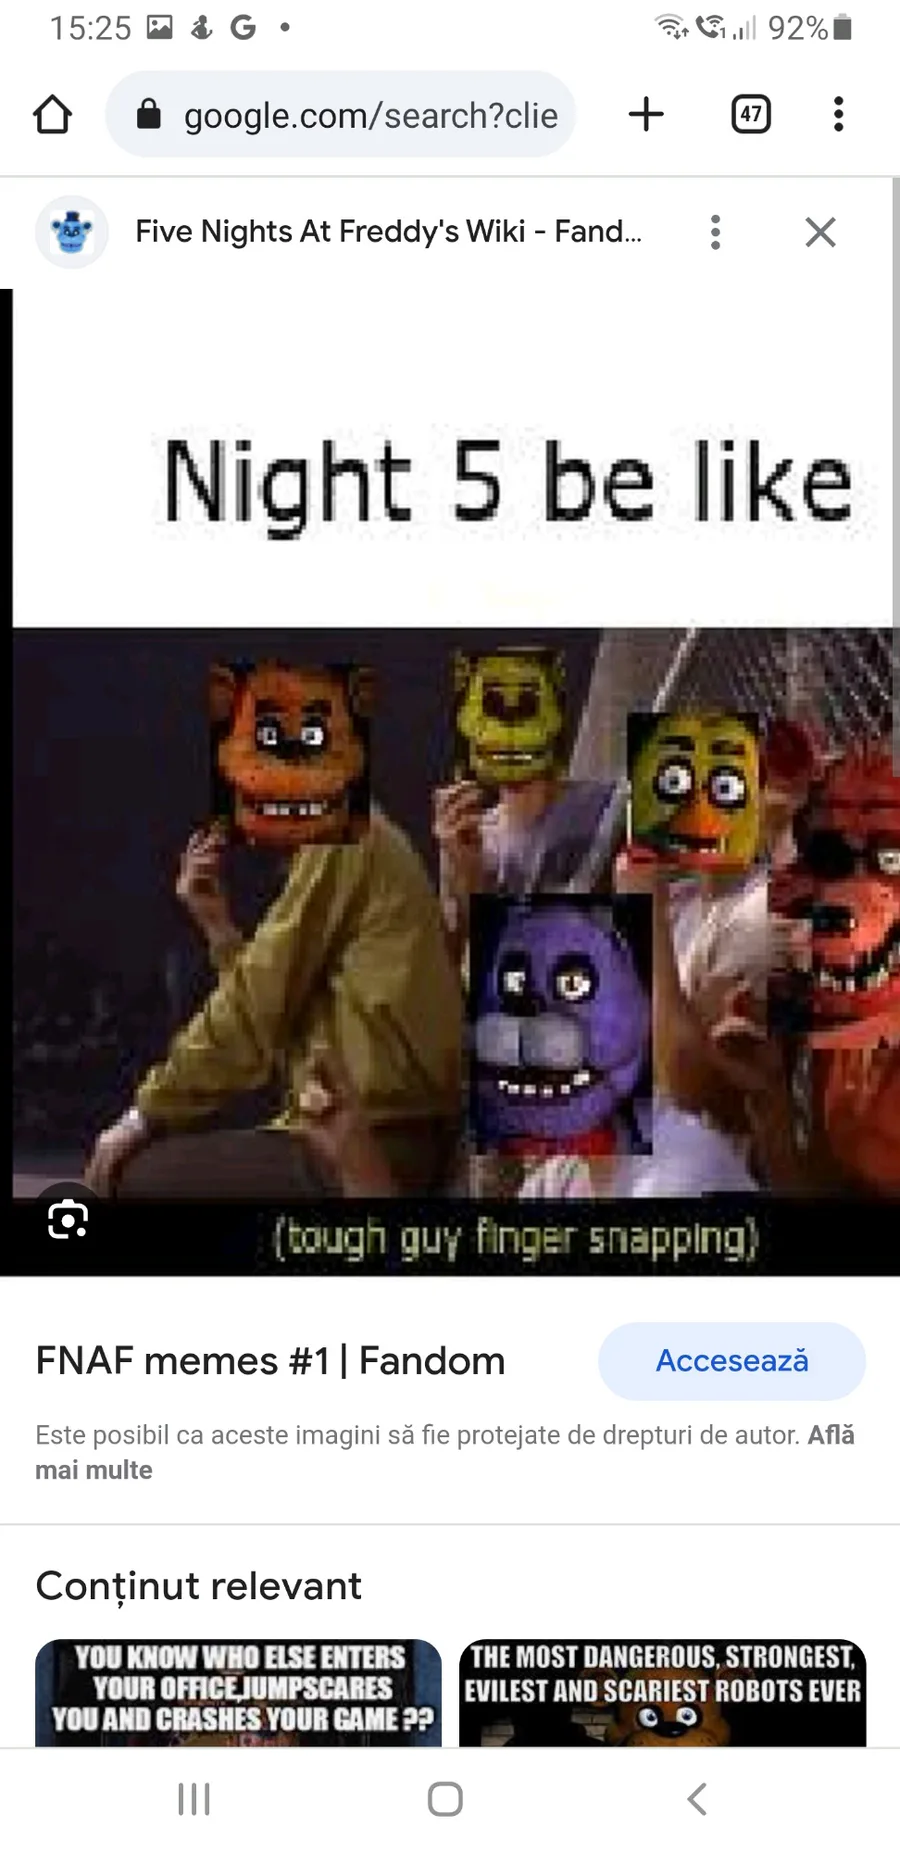 Five Nights at Freddy's: Help Wanted - Full Time Edition, Five Nights at  Freddy's Wiki